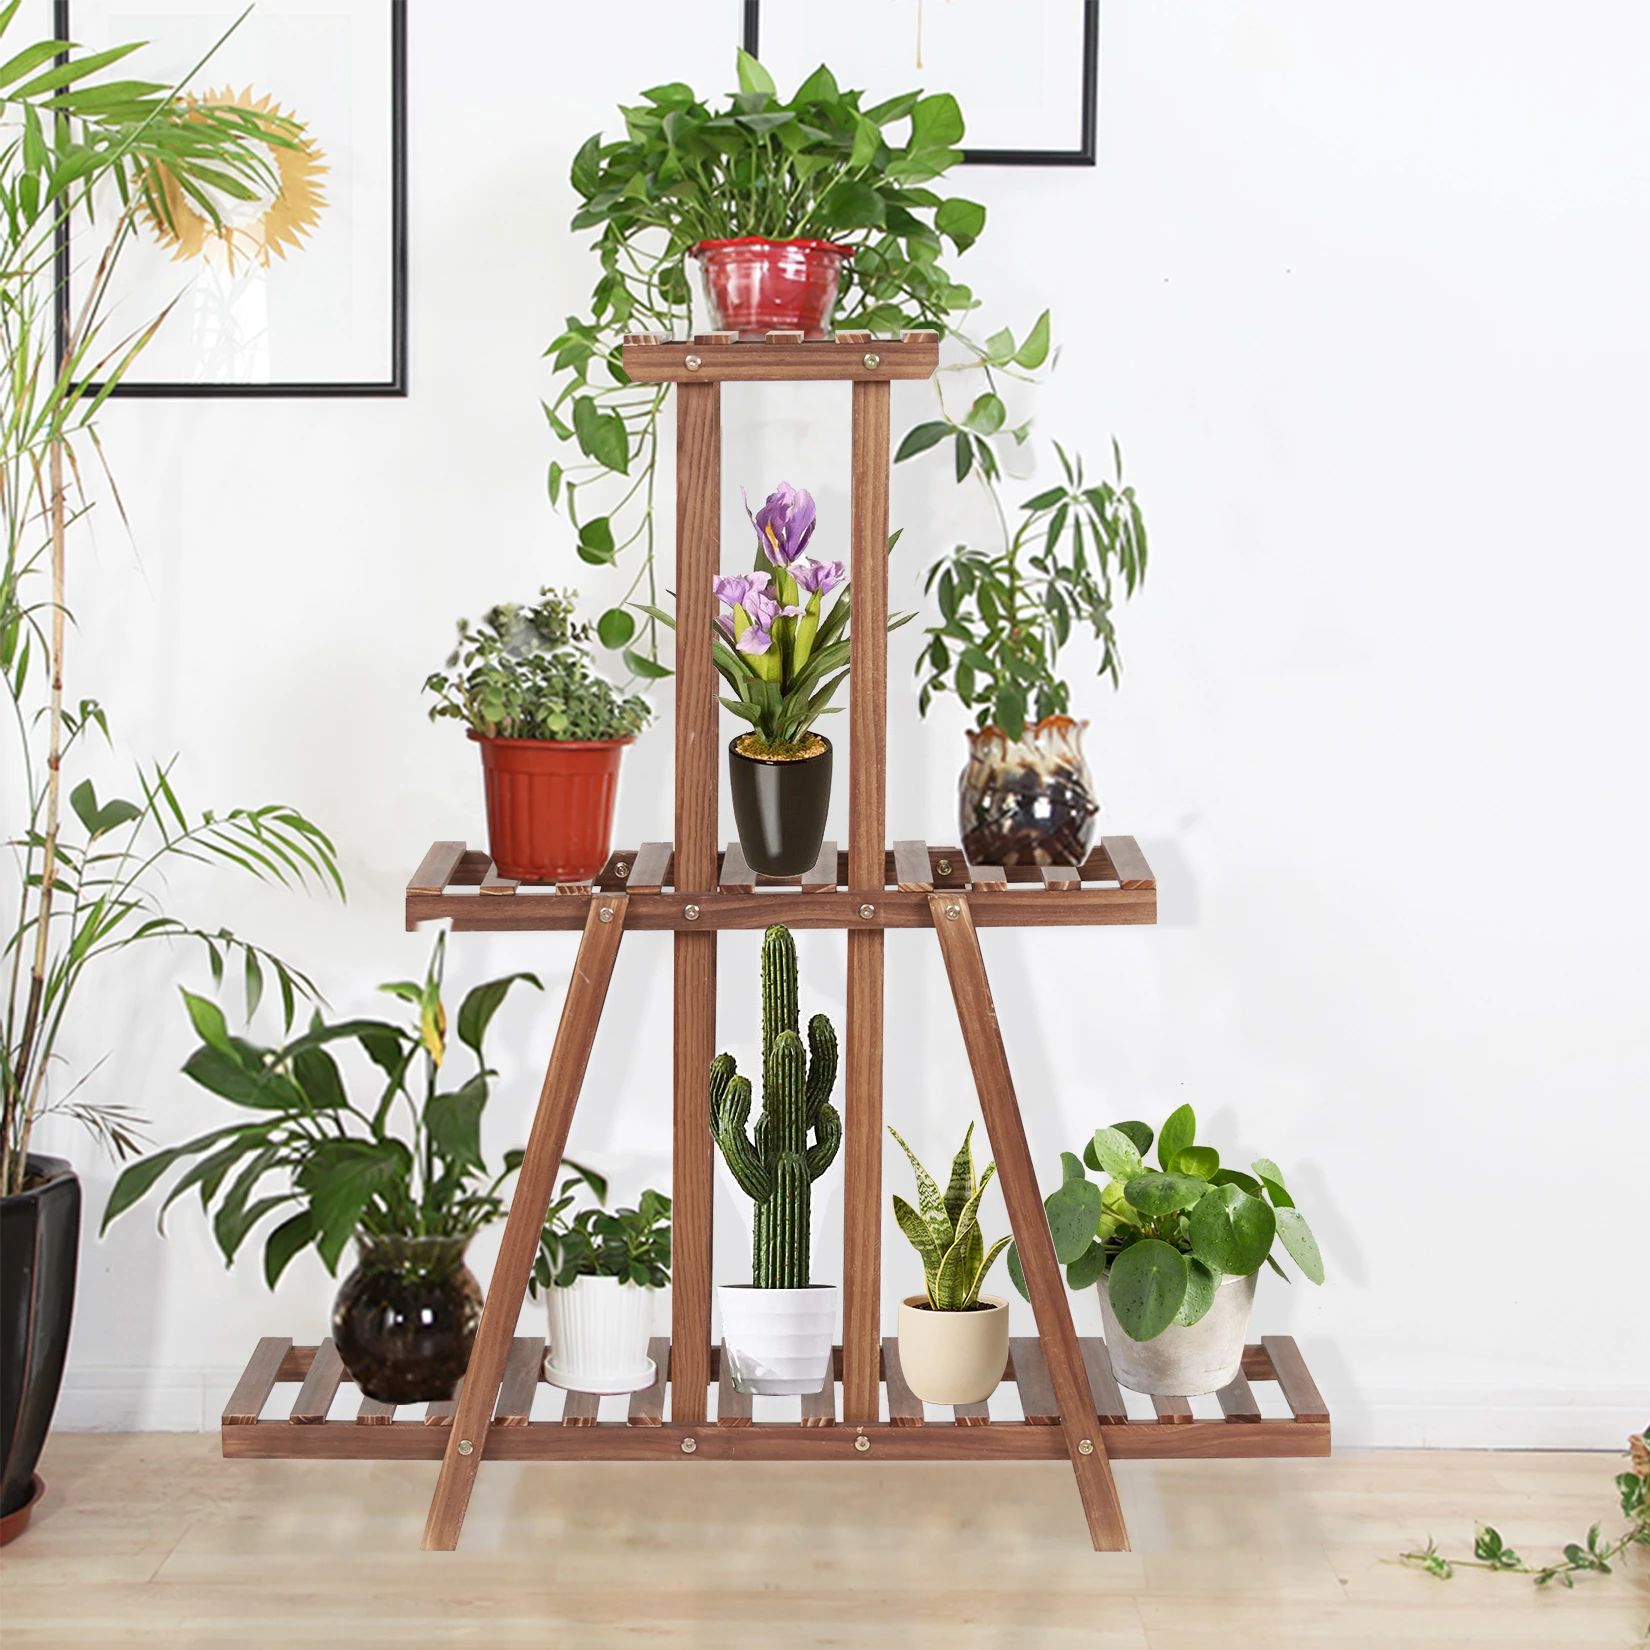 3 Tier Wood Plant Stand, Indoor Tall Plant Stand for Living Room Corner, Multiple Flower Pot Holder Shelf wicker patio furniture